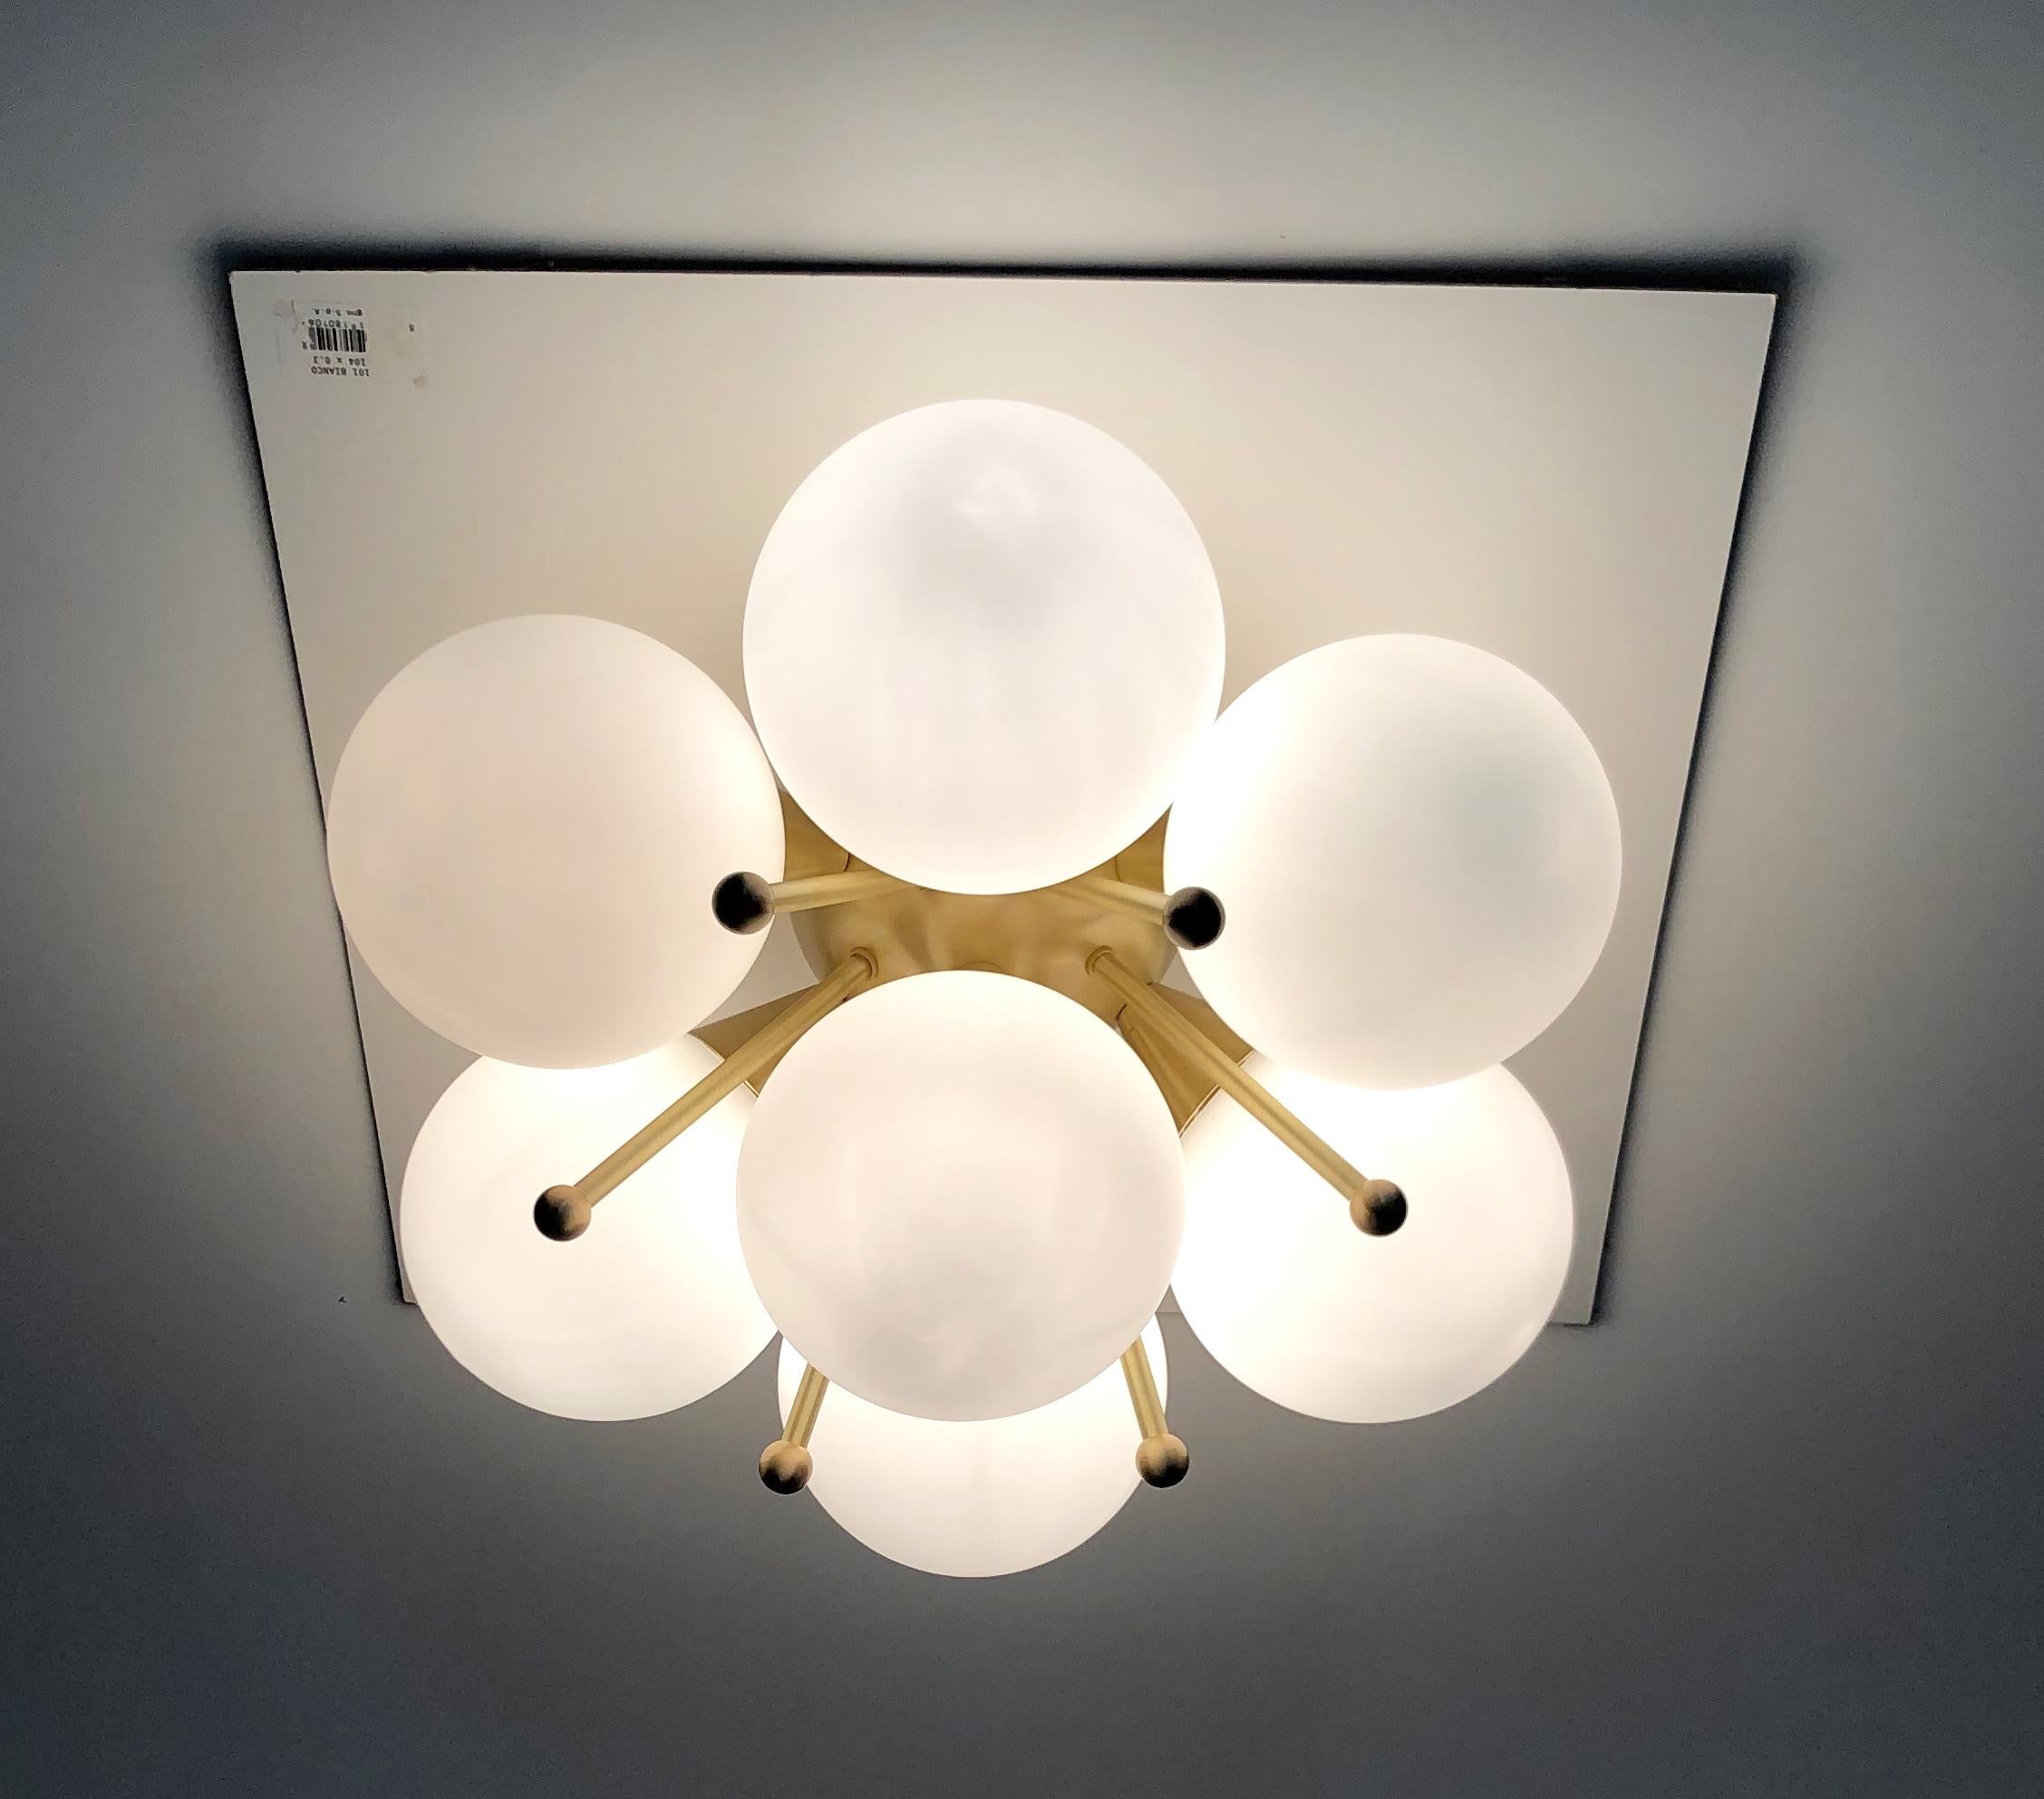 Italian flush mount with Murano glass globes mounted on solid brass frame 
Designed by Fabio Bergomi / Made in Italy 7 lights / E12 or E14 type / max 40W each 
Diameter: 22 inches / Height: 11 inches 
Order only / This item ships from Italy 
Order